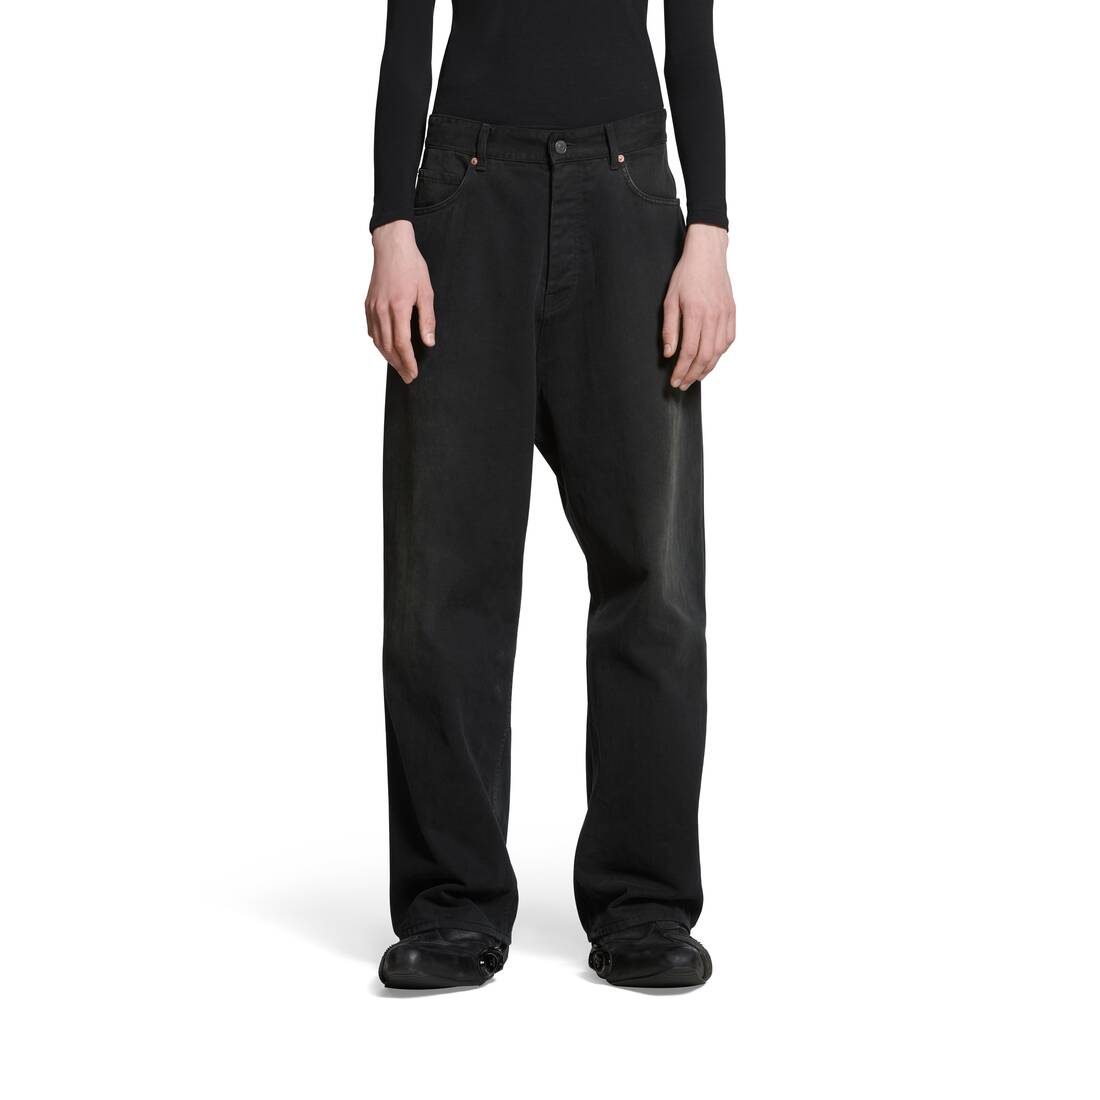 Buy MK Jeans Wide Leg Black Baggy Jeans for Women Size-26 (Black_ZX_1) at  Amazon.in